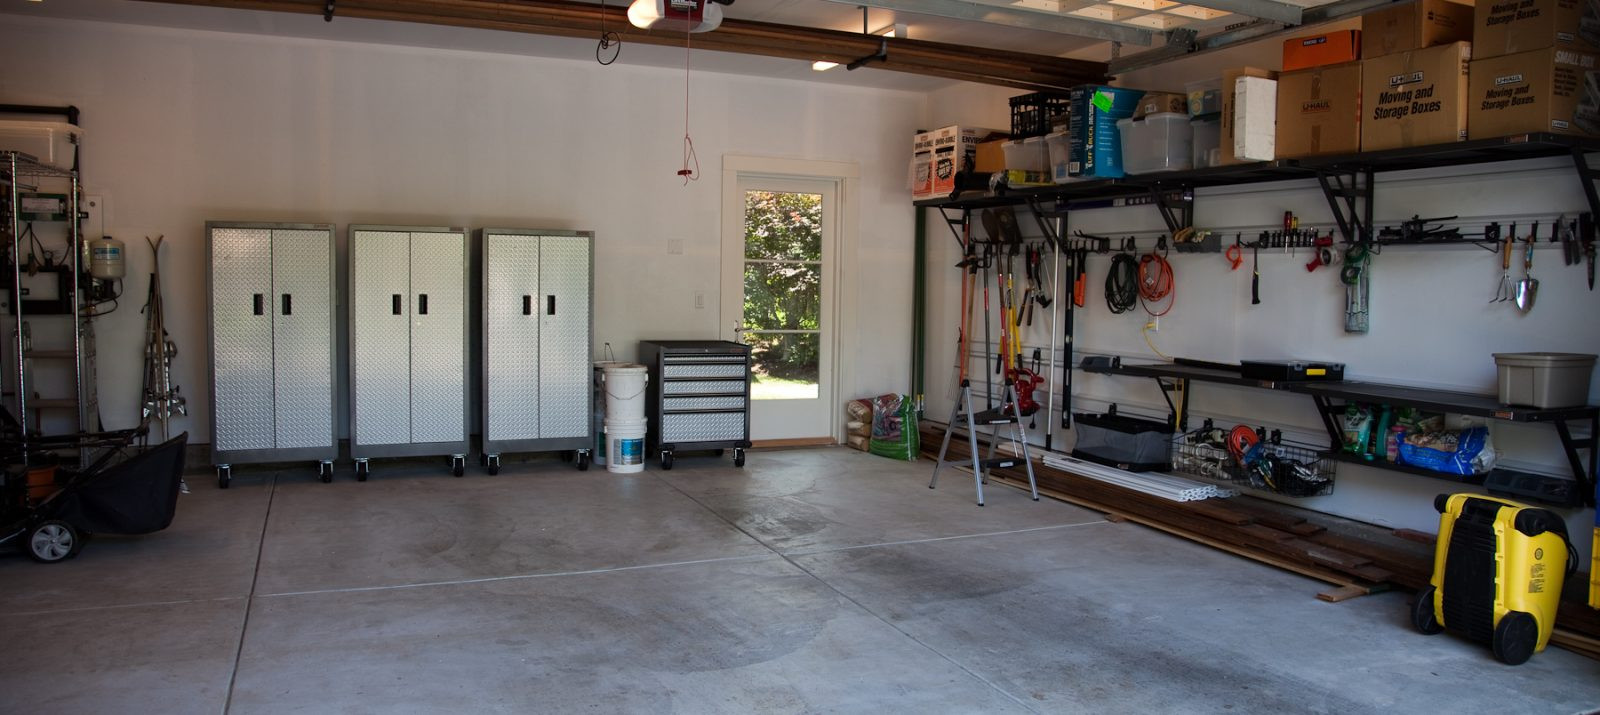 Organizing Your Garage
 How To Easily Clean And Organize Your Garage [Infographic]